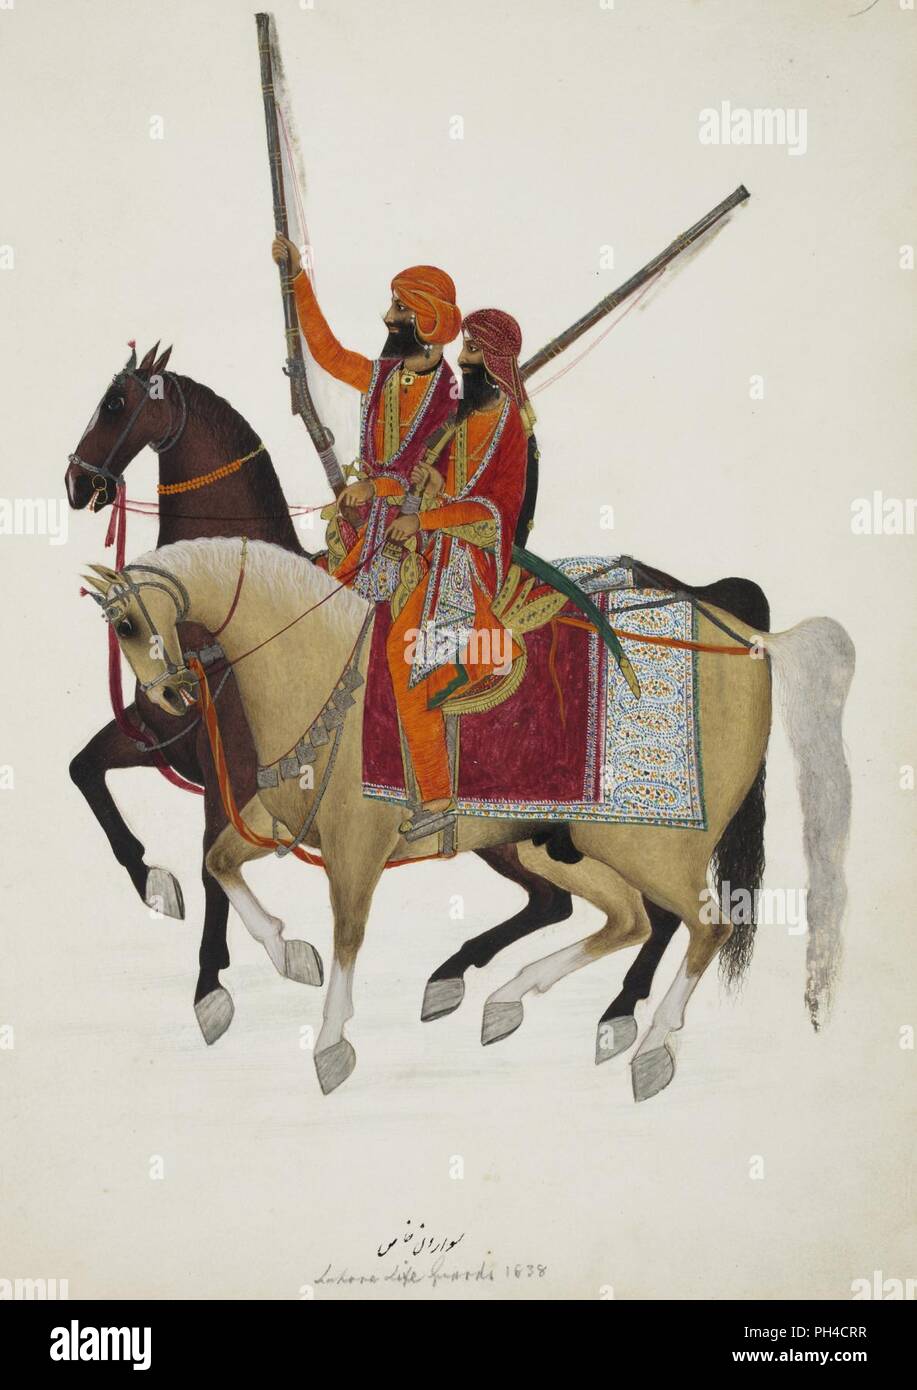 'Bodyguard of Ranjit Singh. Two horsemen on richly caparisoned mounts. Inscribed in Persian characters 'Sawardan i khass'; in English 'Lahore Life Guards 1838'' . Stock Photo